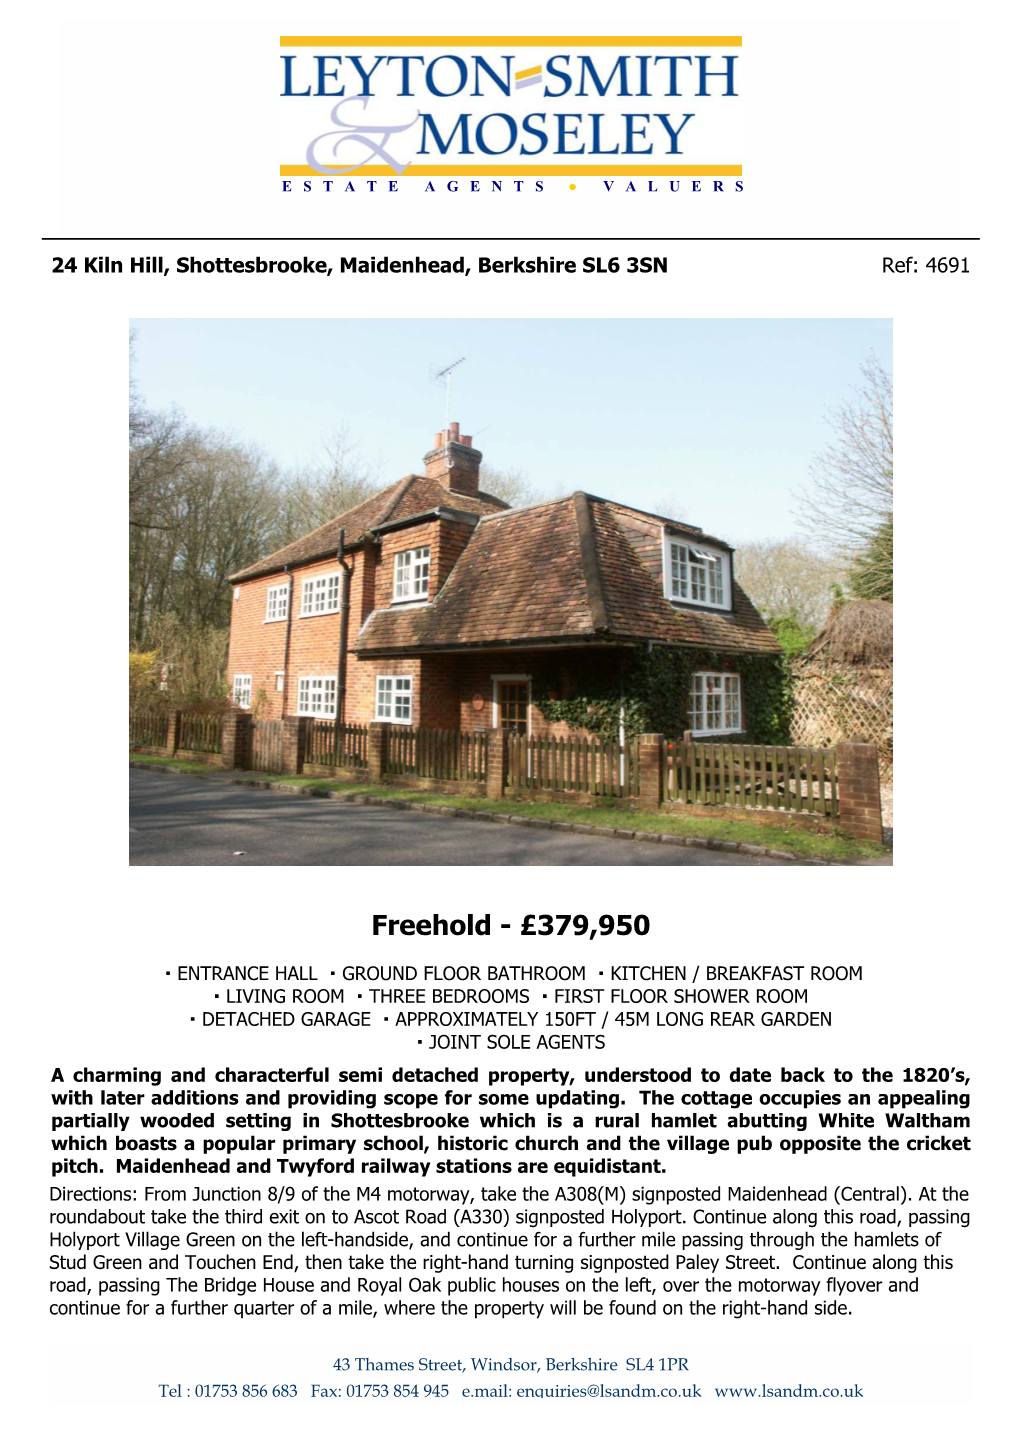 Freehold - £379,950